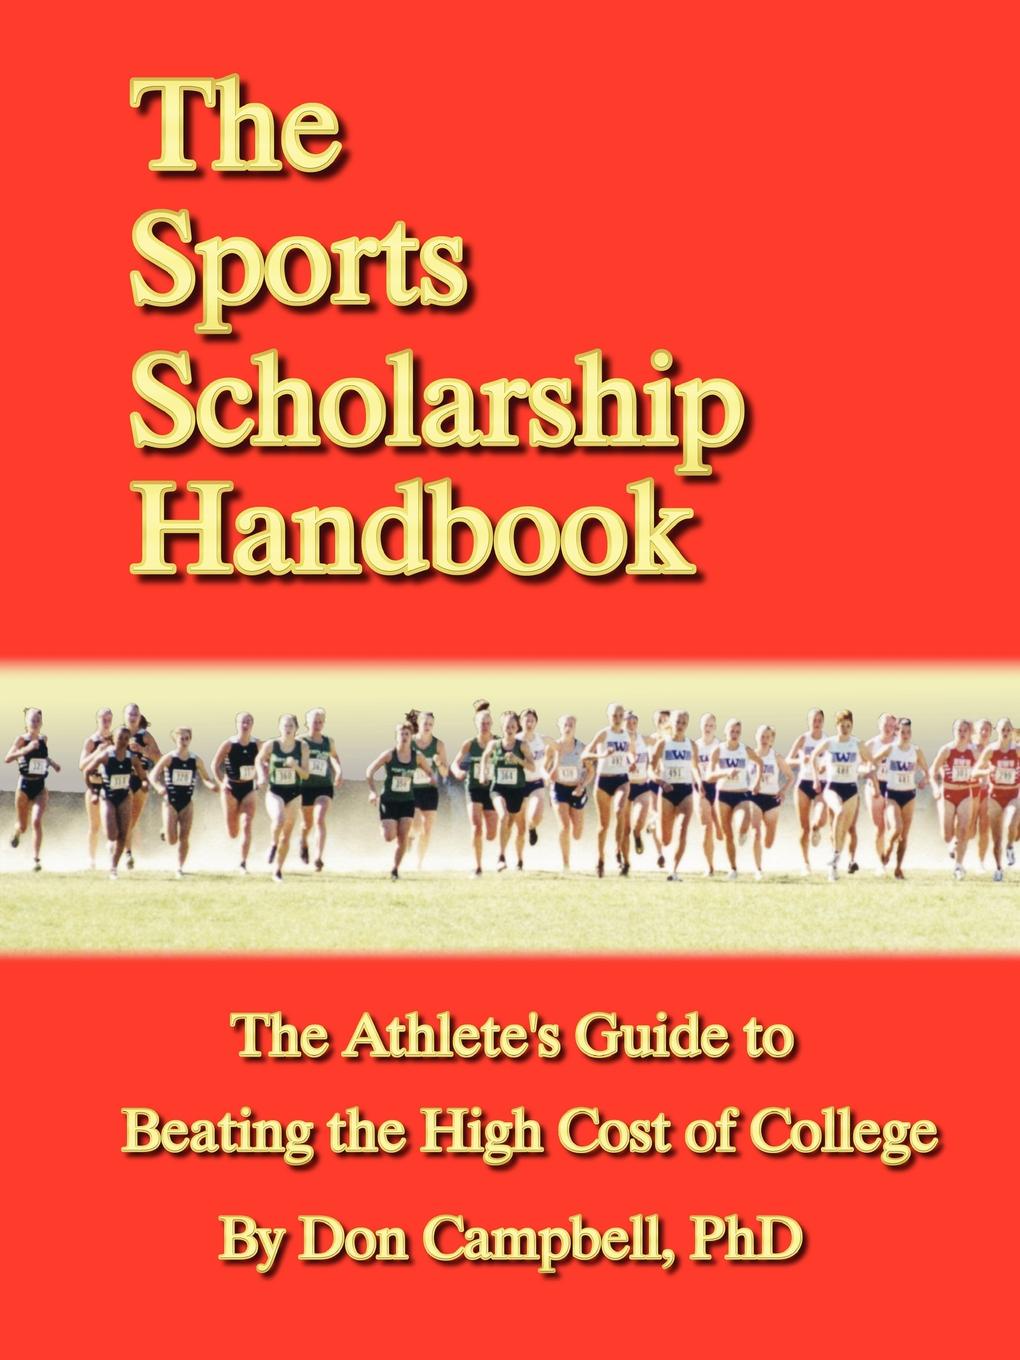 The Sports Scholarship Handbook. The Athlete`s Guide to Beating the High Cost of College